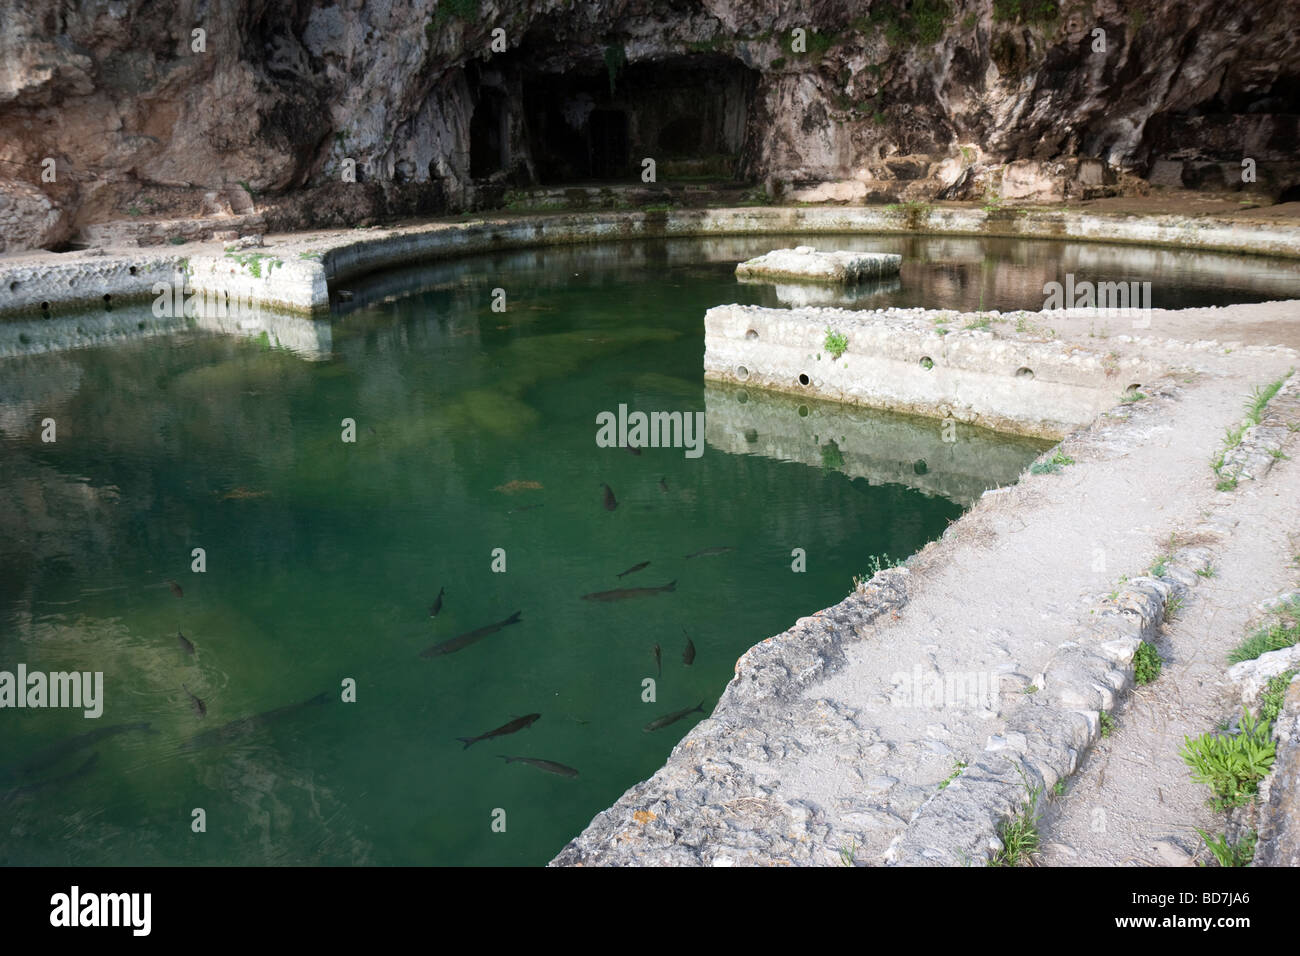 The interior of the Grotto of Tiberius at Sperlonga, showing the ancient fish ponds still teeming with fish to this day. Stock Photo